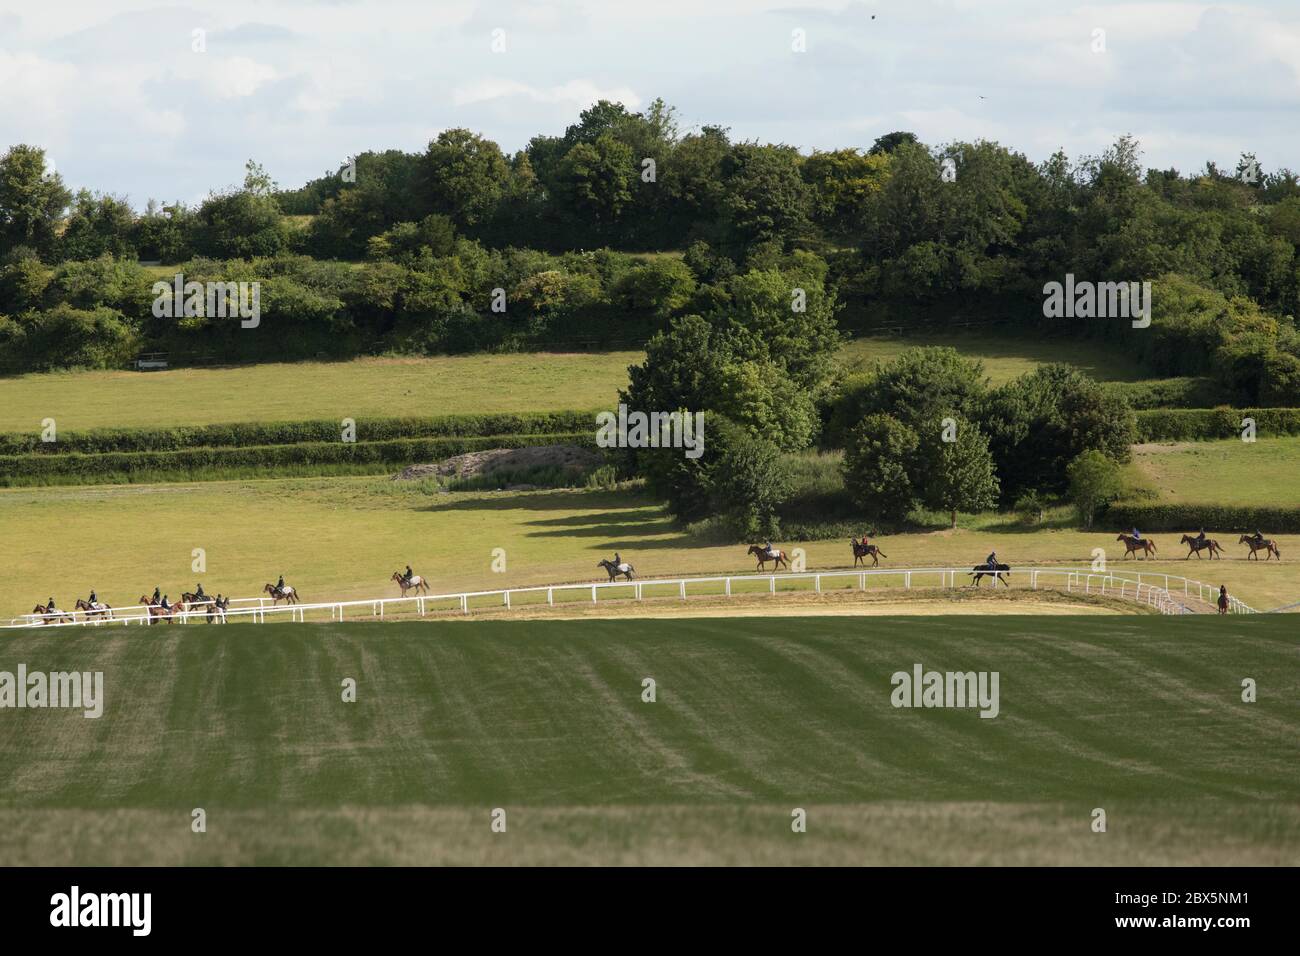 Kingsclere, Hampshire. 5th June, 2020. Riders and their horses train on the gallops, at the Kingsclere Park House Stables, which are run by horse racing trainer Andrew Balding, in Hampshire, Britain on June 5, 2020. Horse racing behind closed doors has resumed gradually in Britain after the government eased some lockdown restrictions. Racing is taking place behind closed doors with strict measures taken to prevent the spread of coronavirus. Credit: Tim Ireland/Xinhua/Alamy Live News Stock Photo